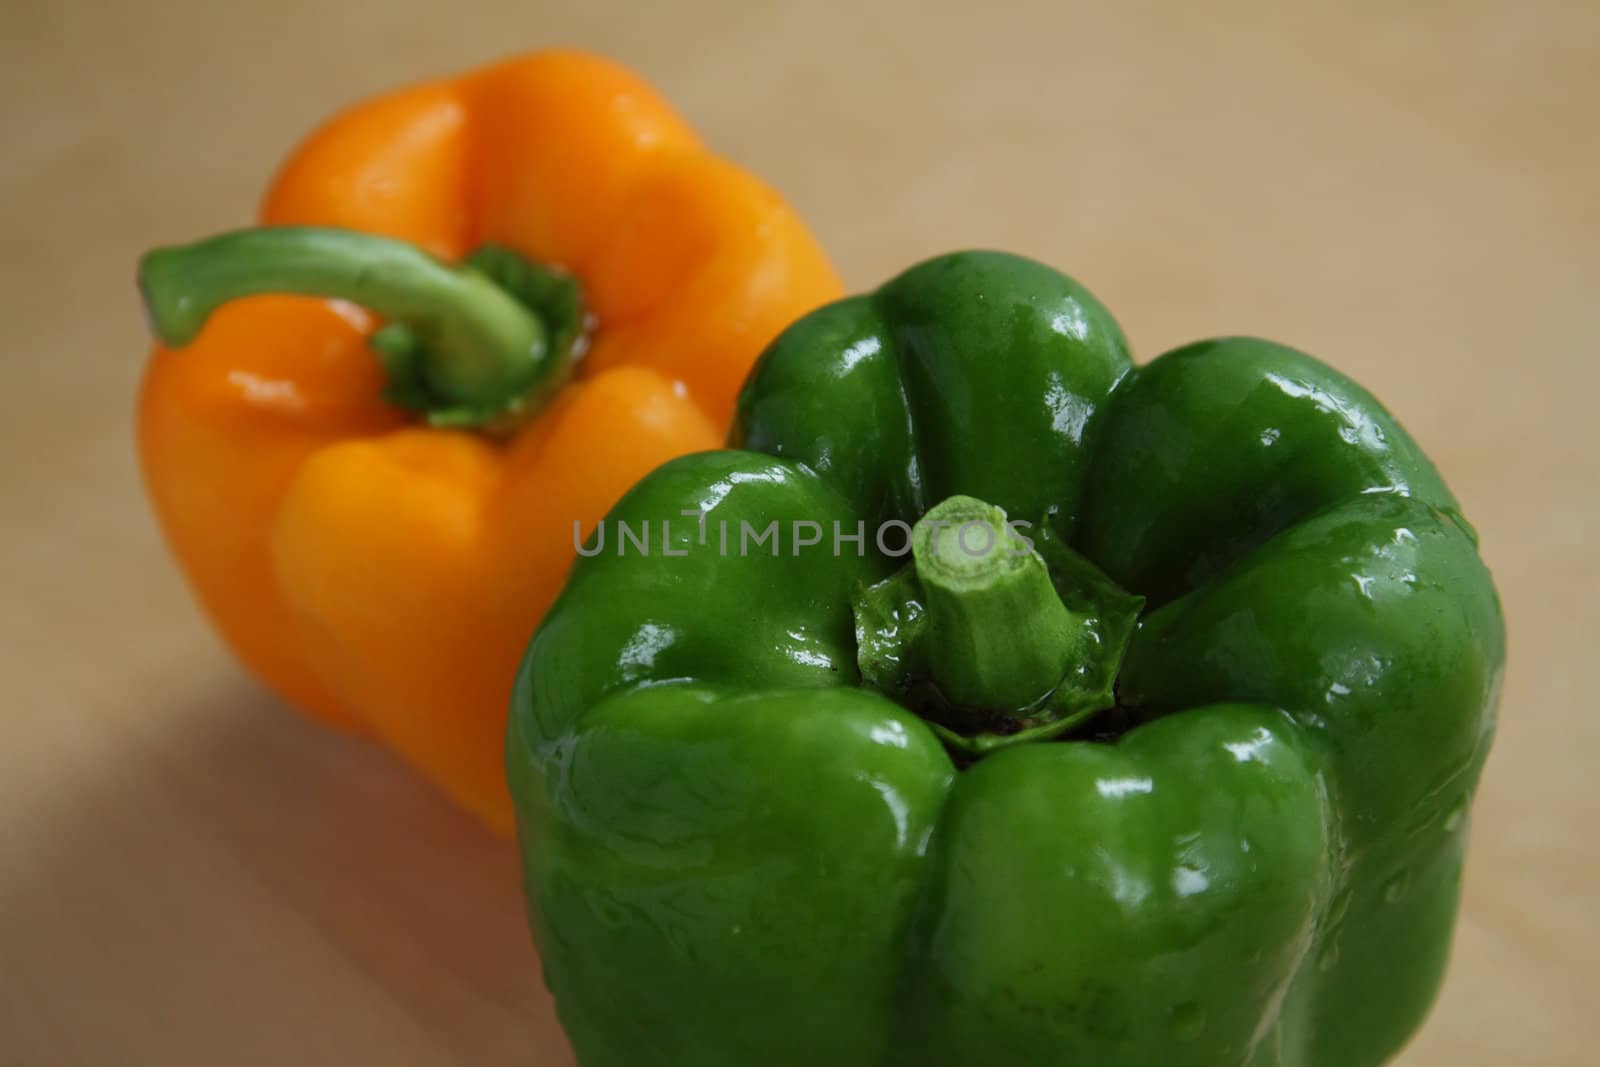 Two peppers, green and orange, on kitchen table